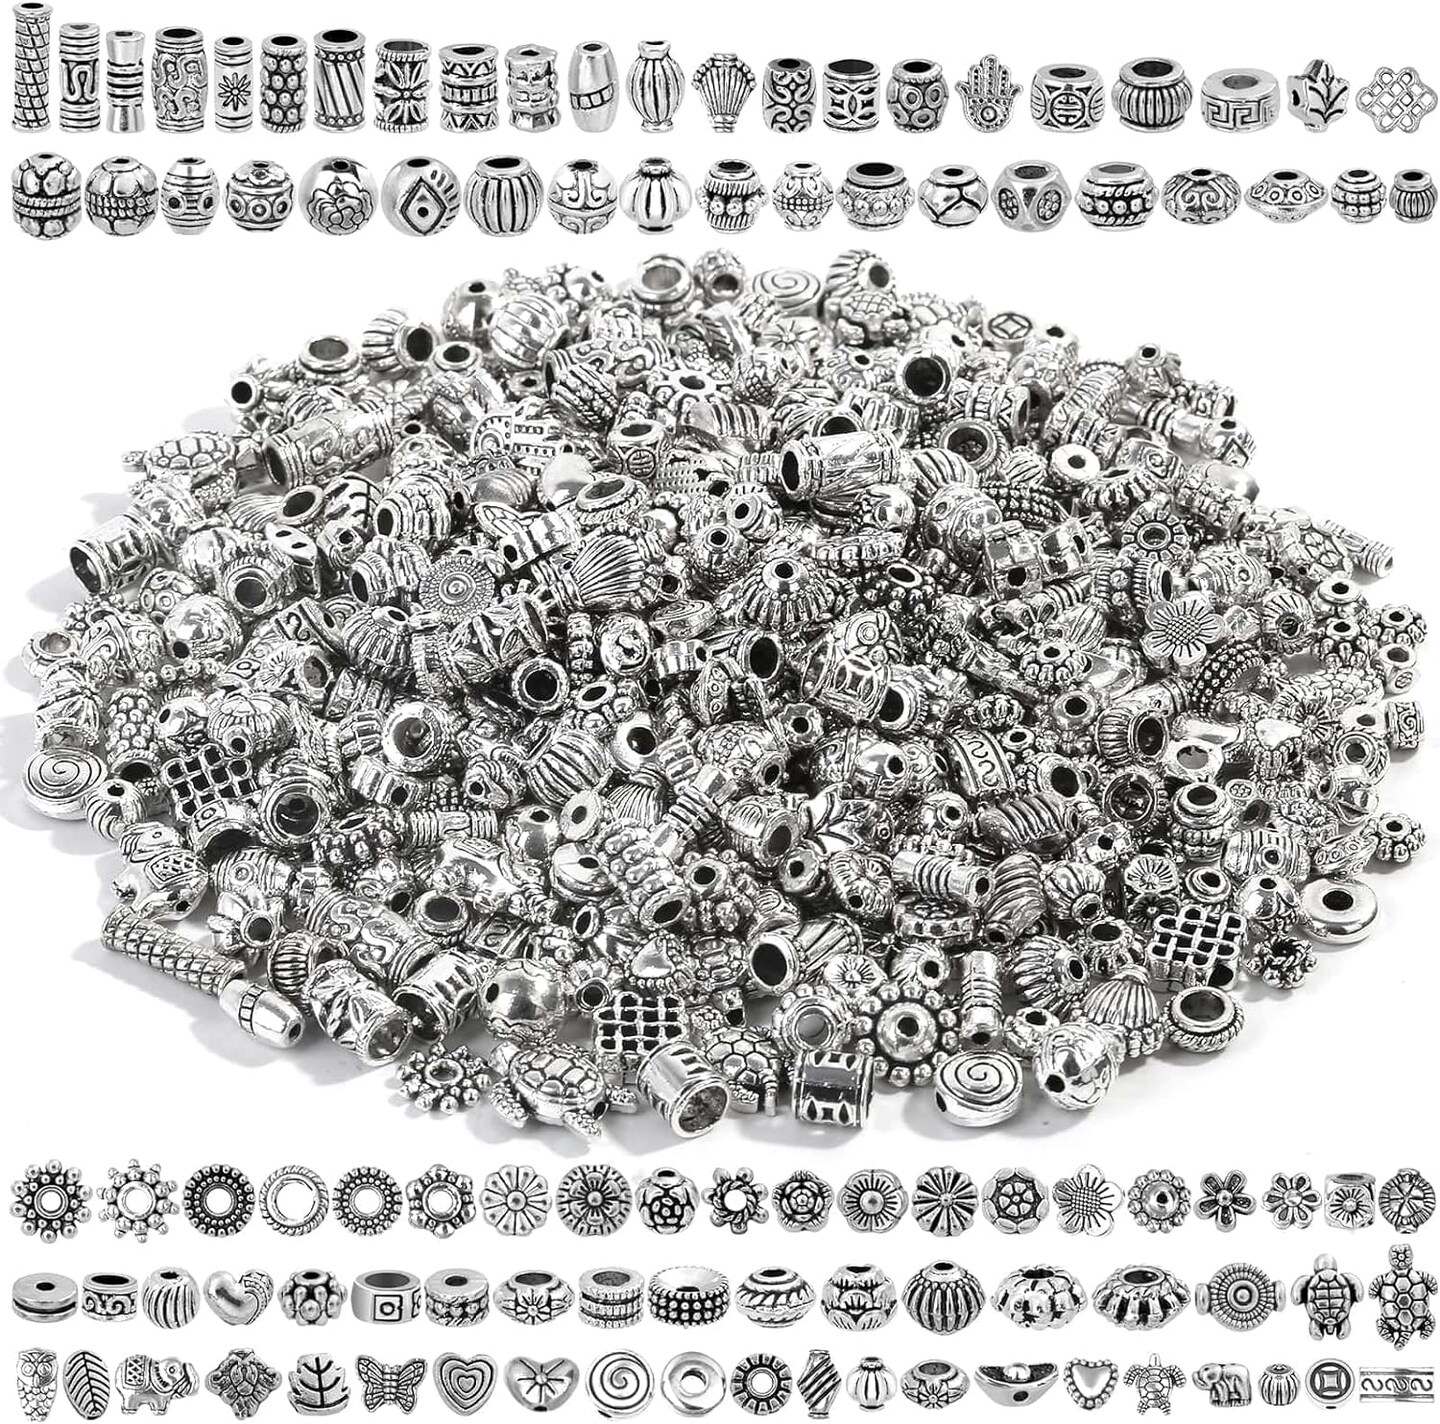 500 Pcs Bracelet Spacer Beads, Silver Bulk Random Styles Loose Spacer Metal Charm for Necklace, Earring Making DIY Jewelry Accessories